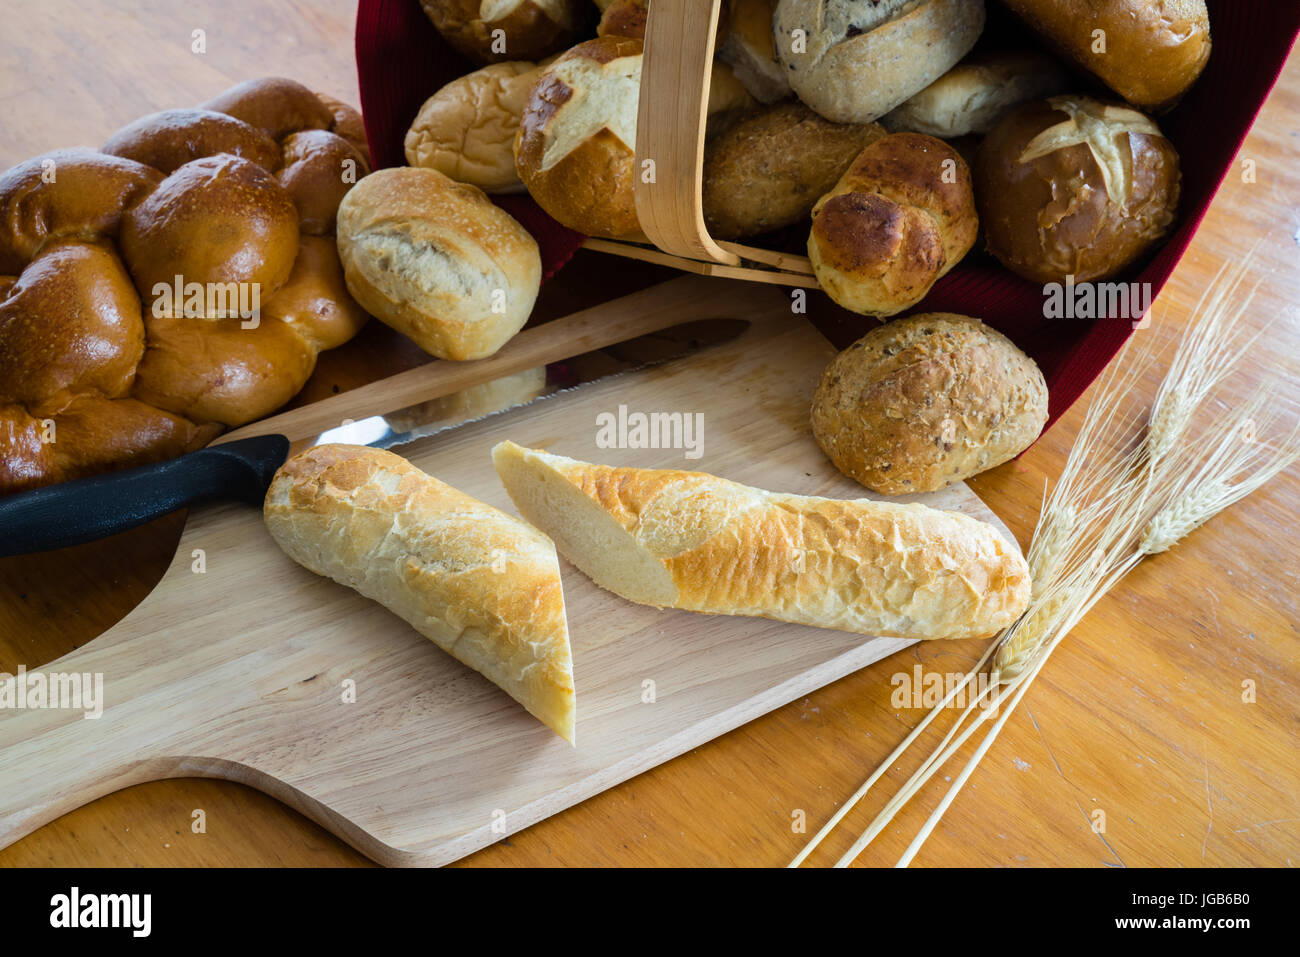 Collection of breads including Challah, baguettes and rolls Stock Photo